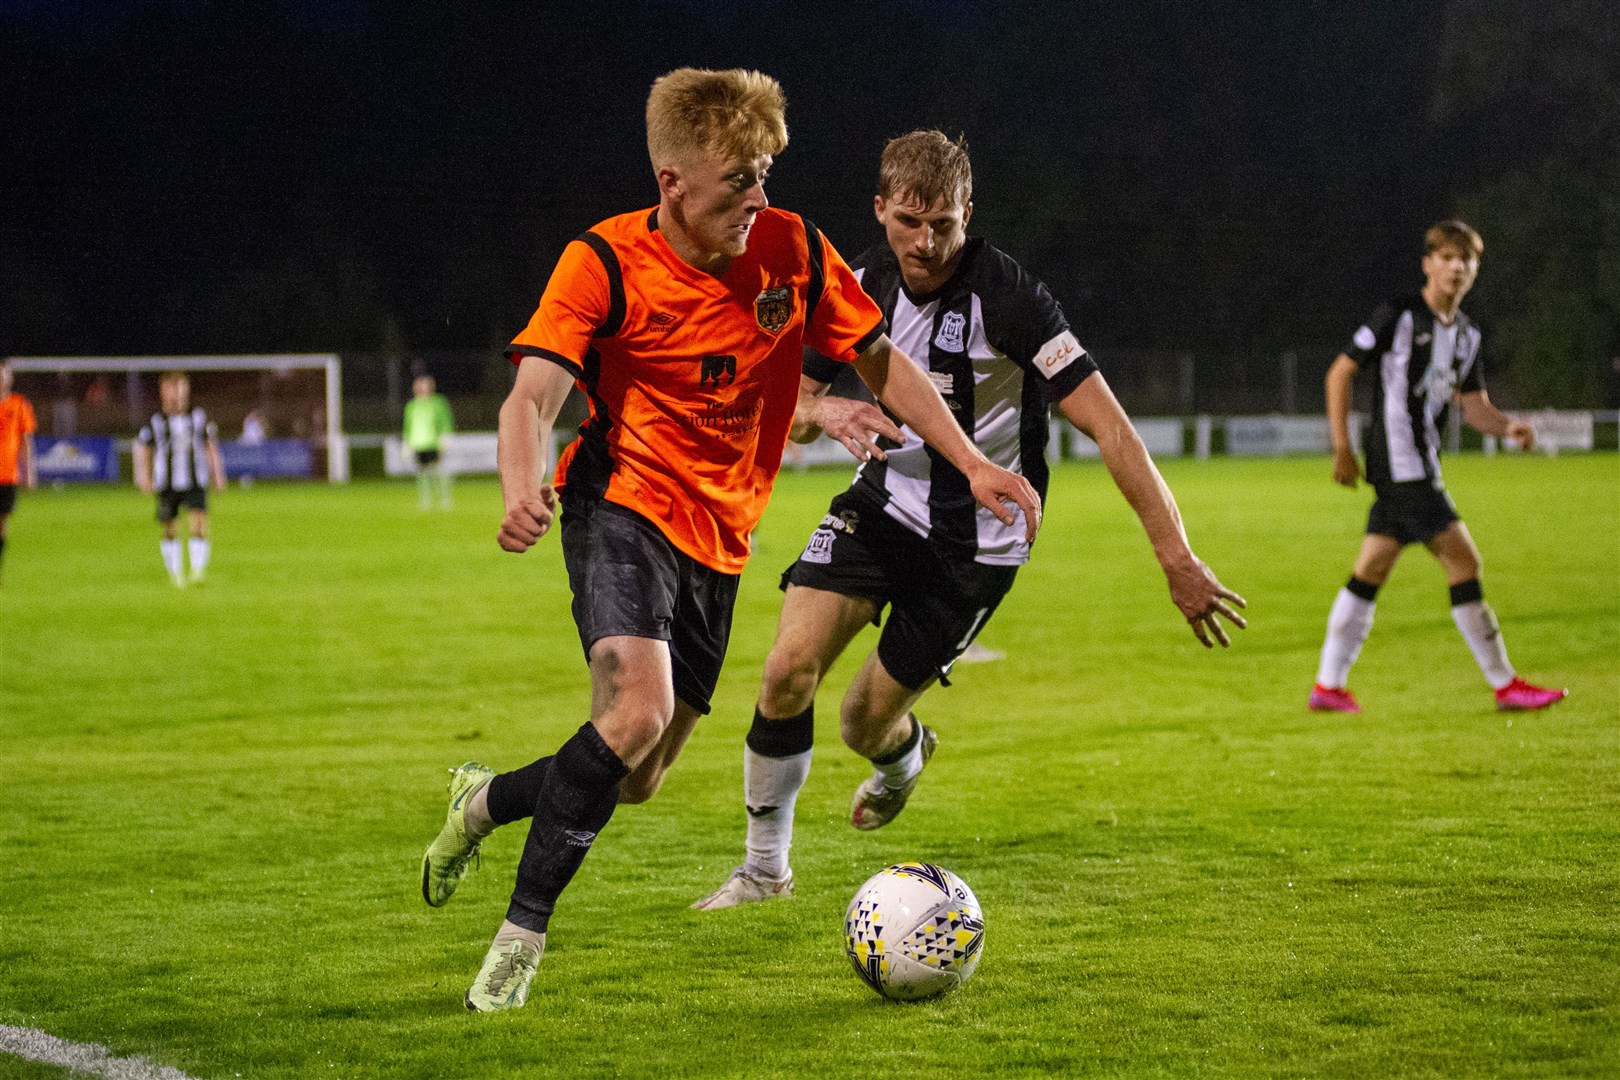 Rothes' Ross Gunn and Elgin's Aidan Sopel compete. ..Rothes FC (2) vs Elgin City FC (0) - North of Scotland Cup Quarter Final - Mackessack Park, Rothes 18/08/2021...Picture: Daniel Forsyth....